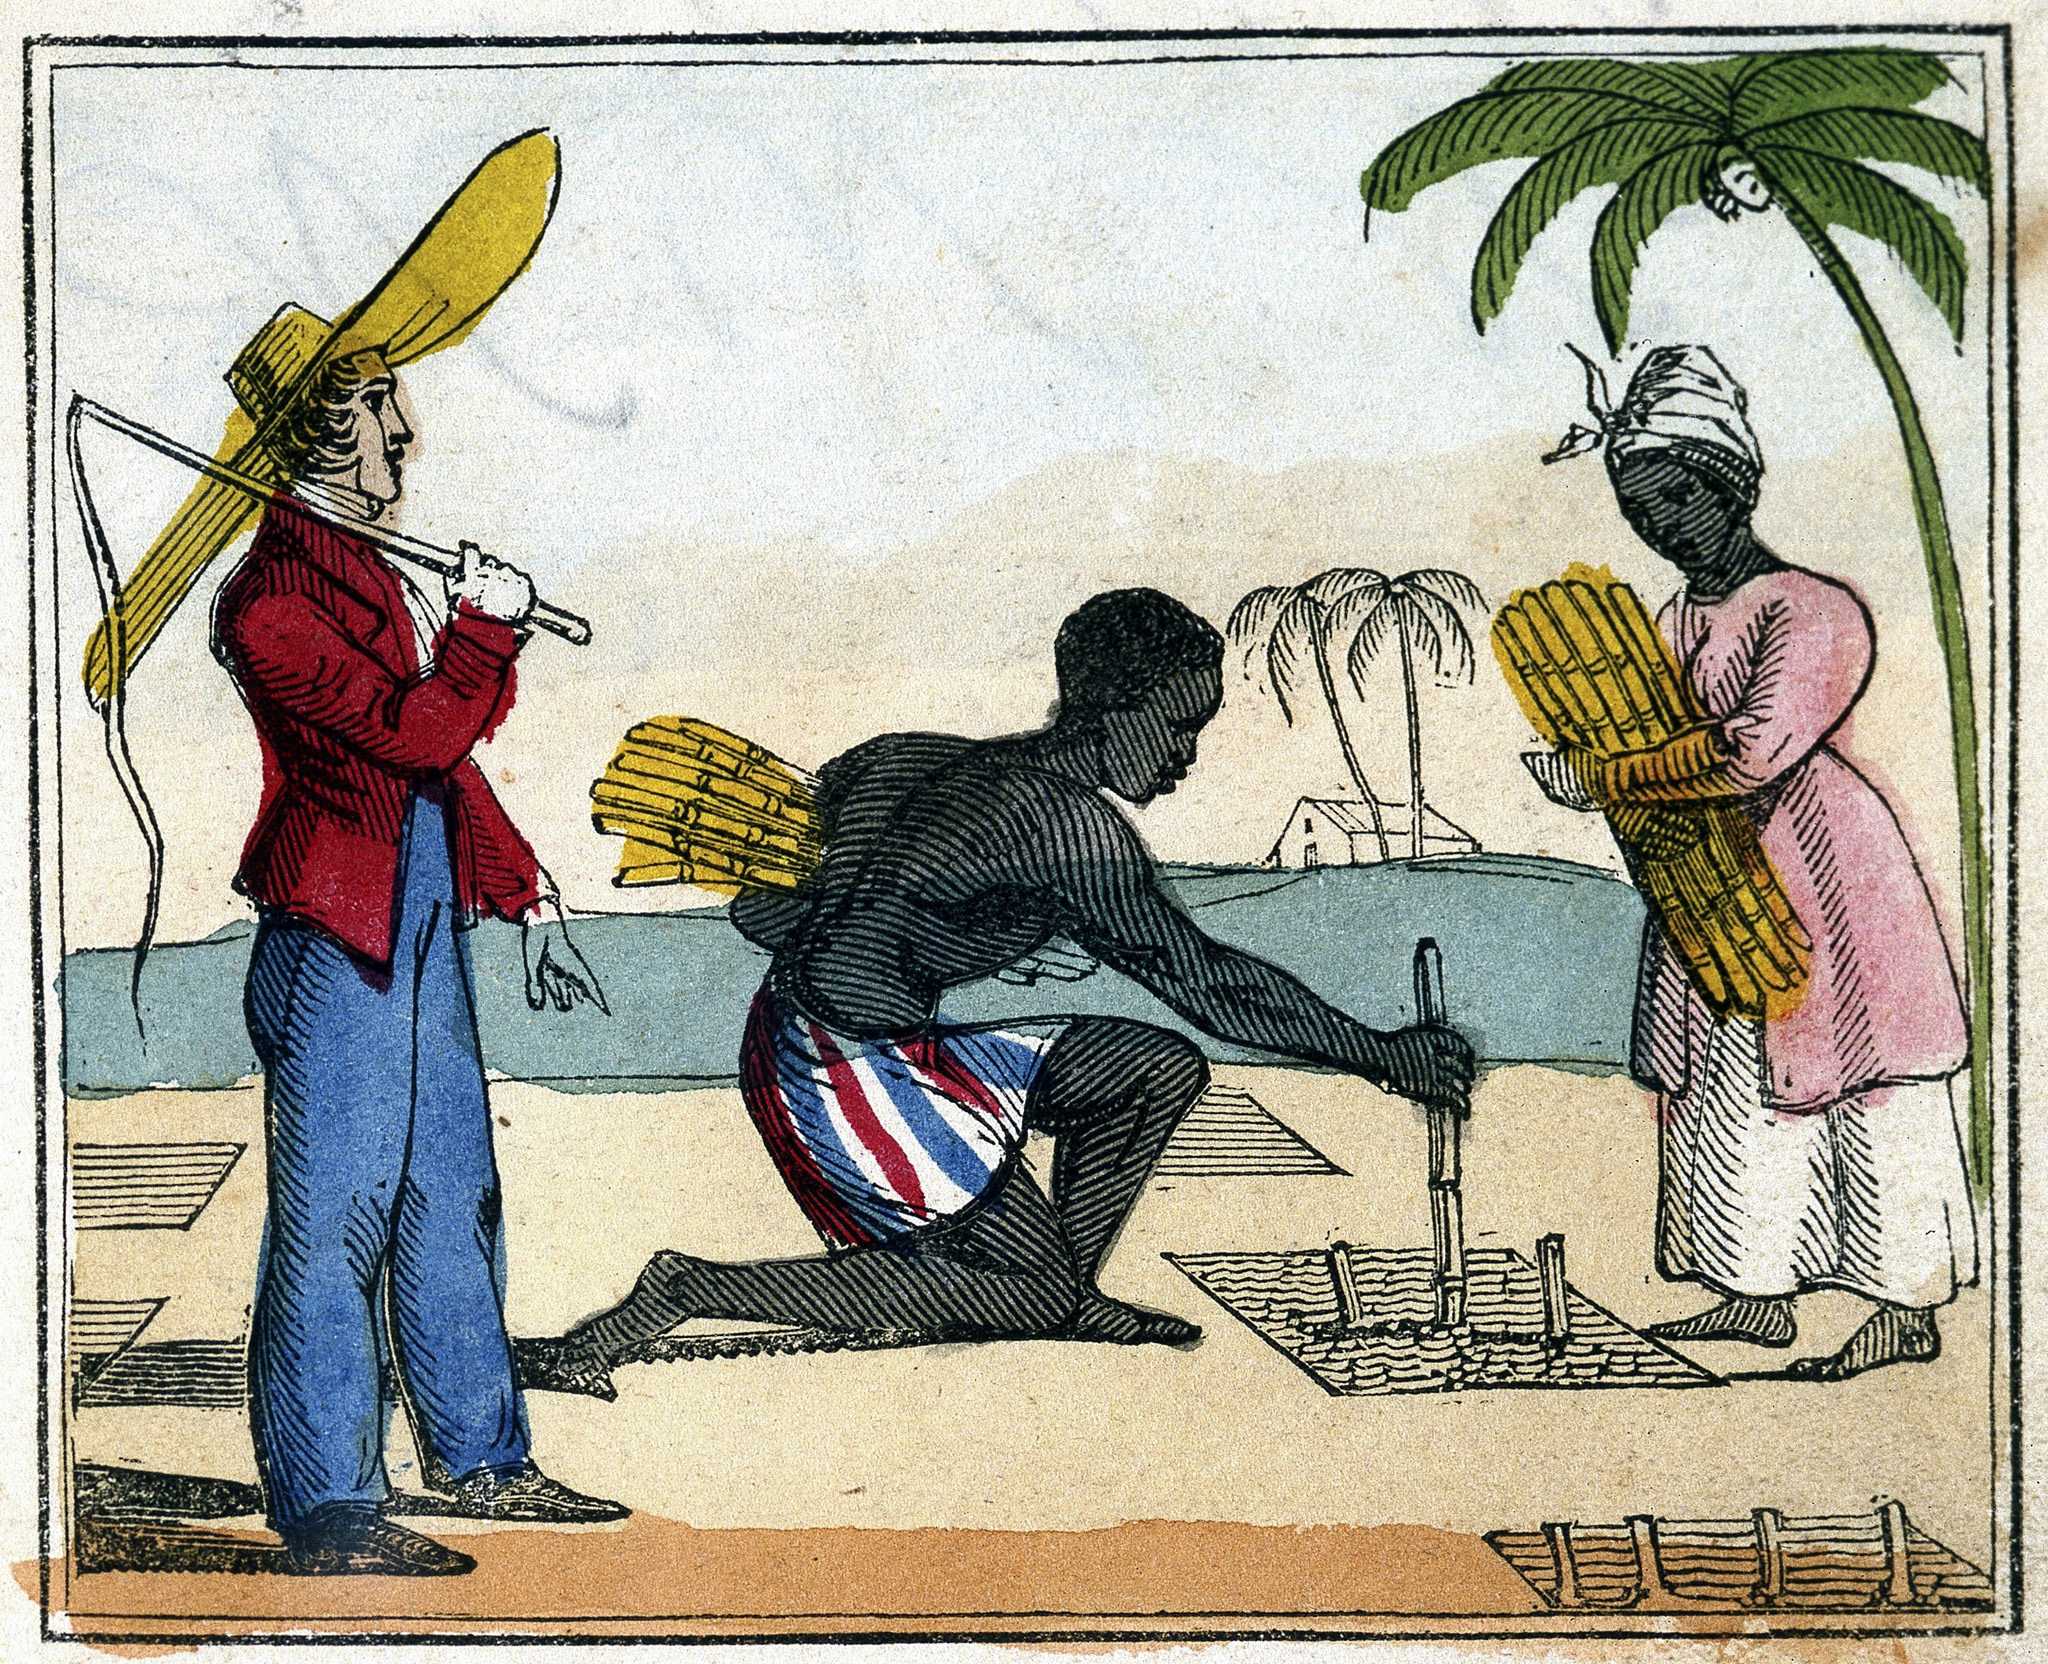 Illustration of enslaved people working in the cane field